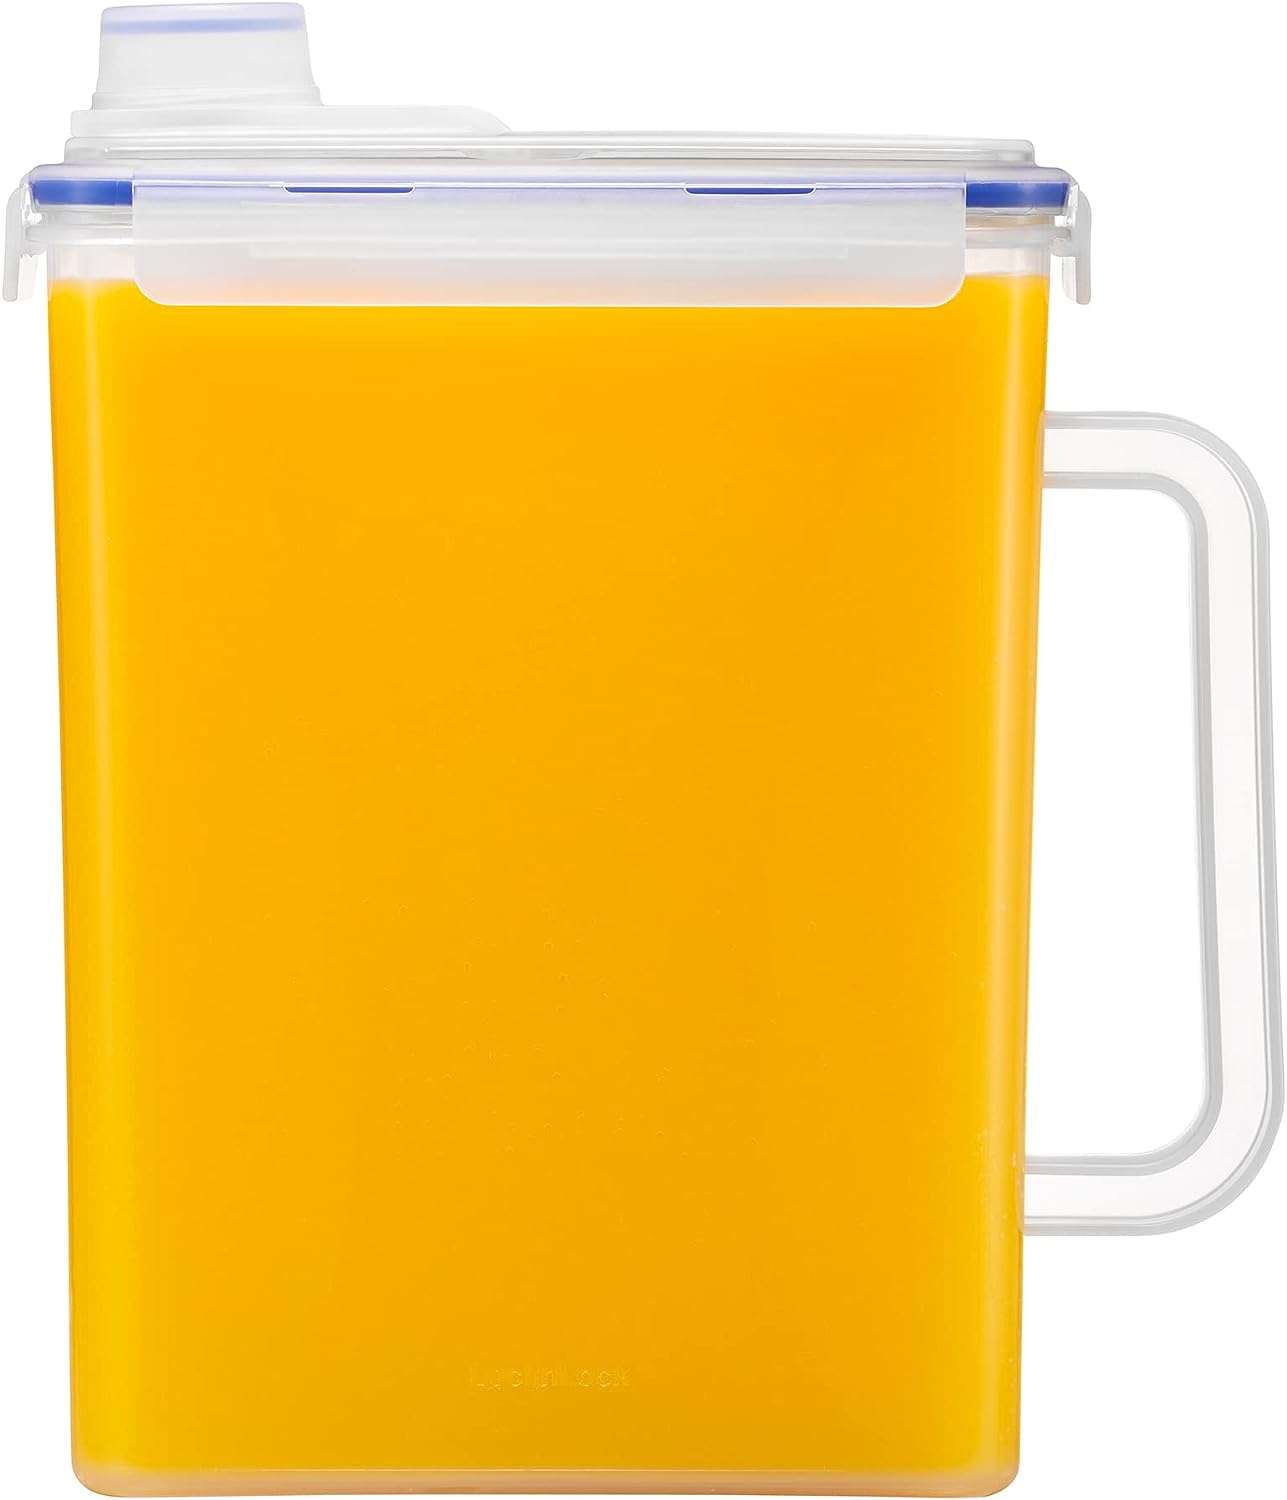 2 Pack Heavy Duty 1 Gallon/4.5 Liter Round Clear Plastic Pitcher Jug with Lid See Through Base & Handle for Water Iced Tea Beverages-10 x 7 inch